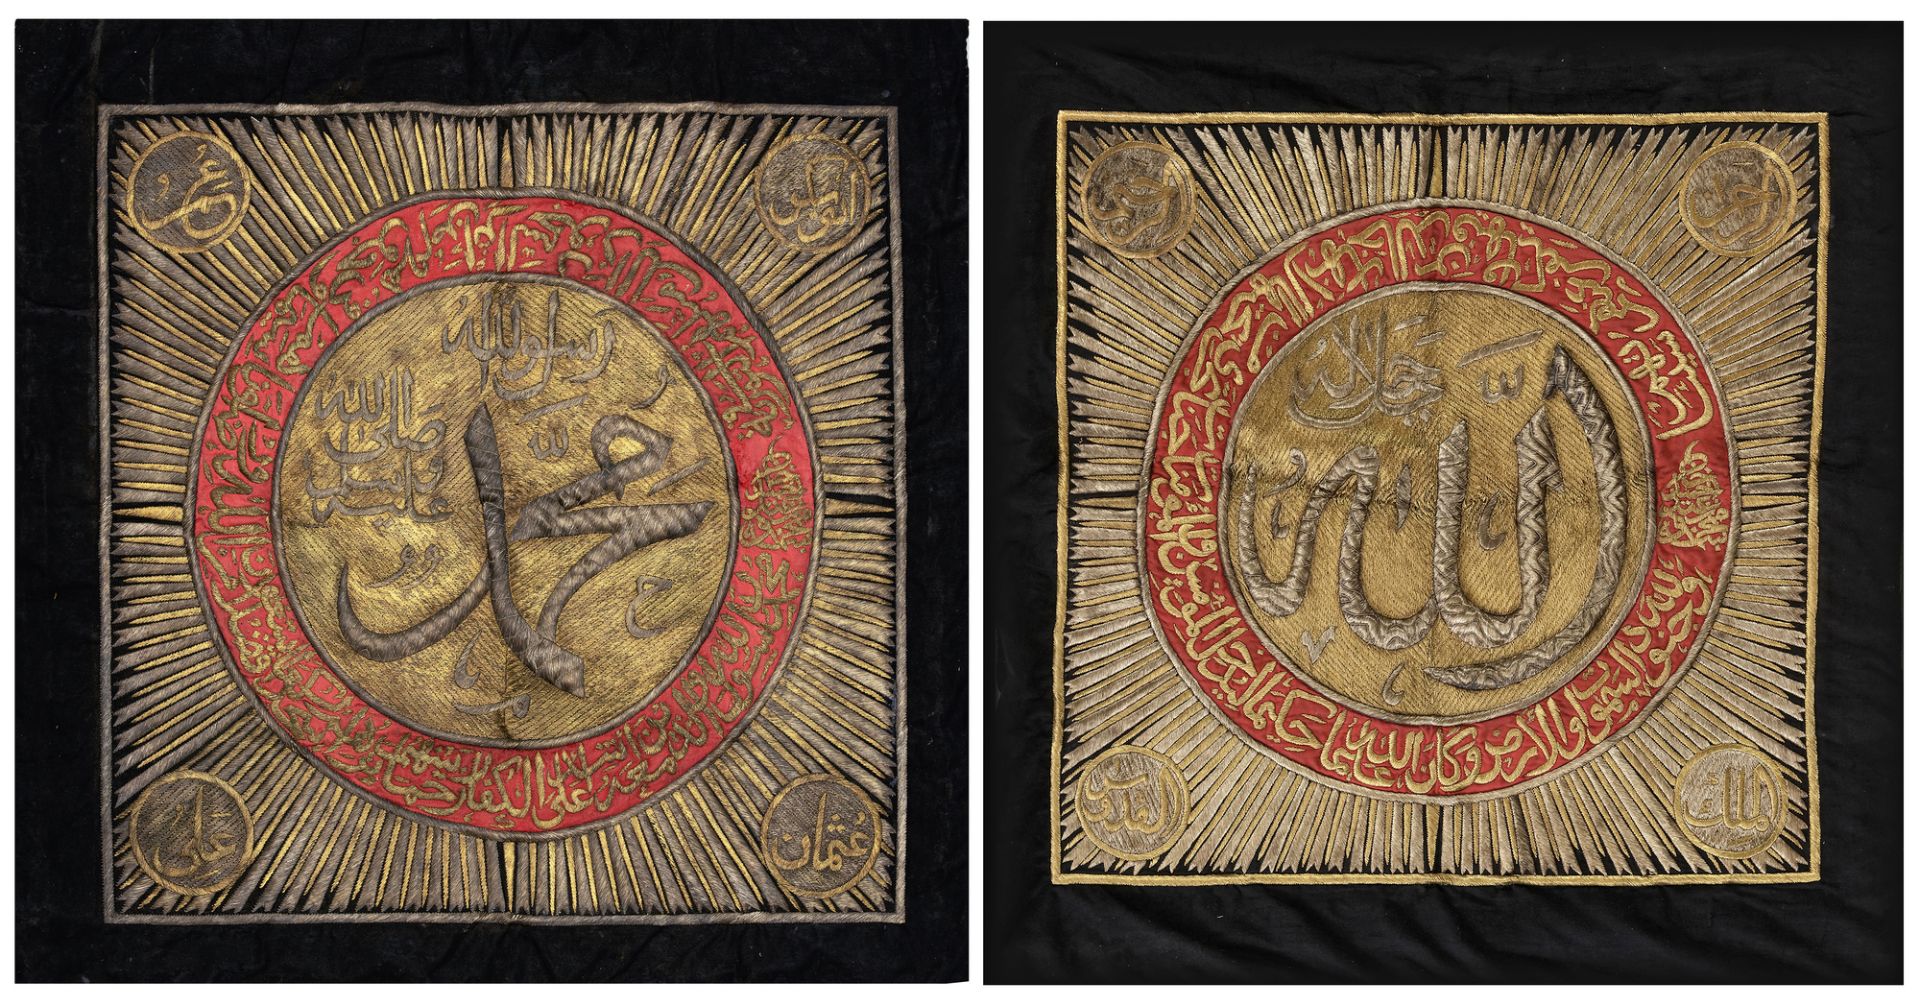 TWO OTTOMAN METAL-THREAD TEXTILE PANELS WITH THE NAMES OF ALLAH AND MUHAMMAD, TURKEY, 19TH CENTURY